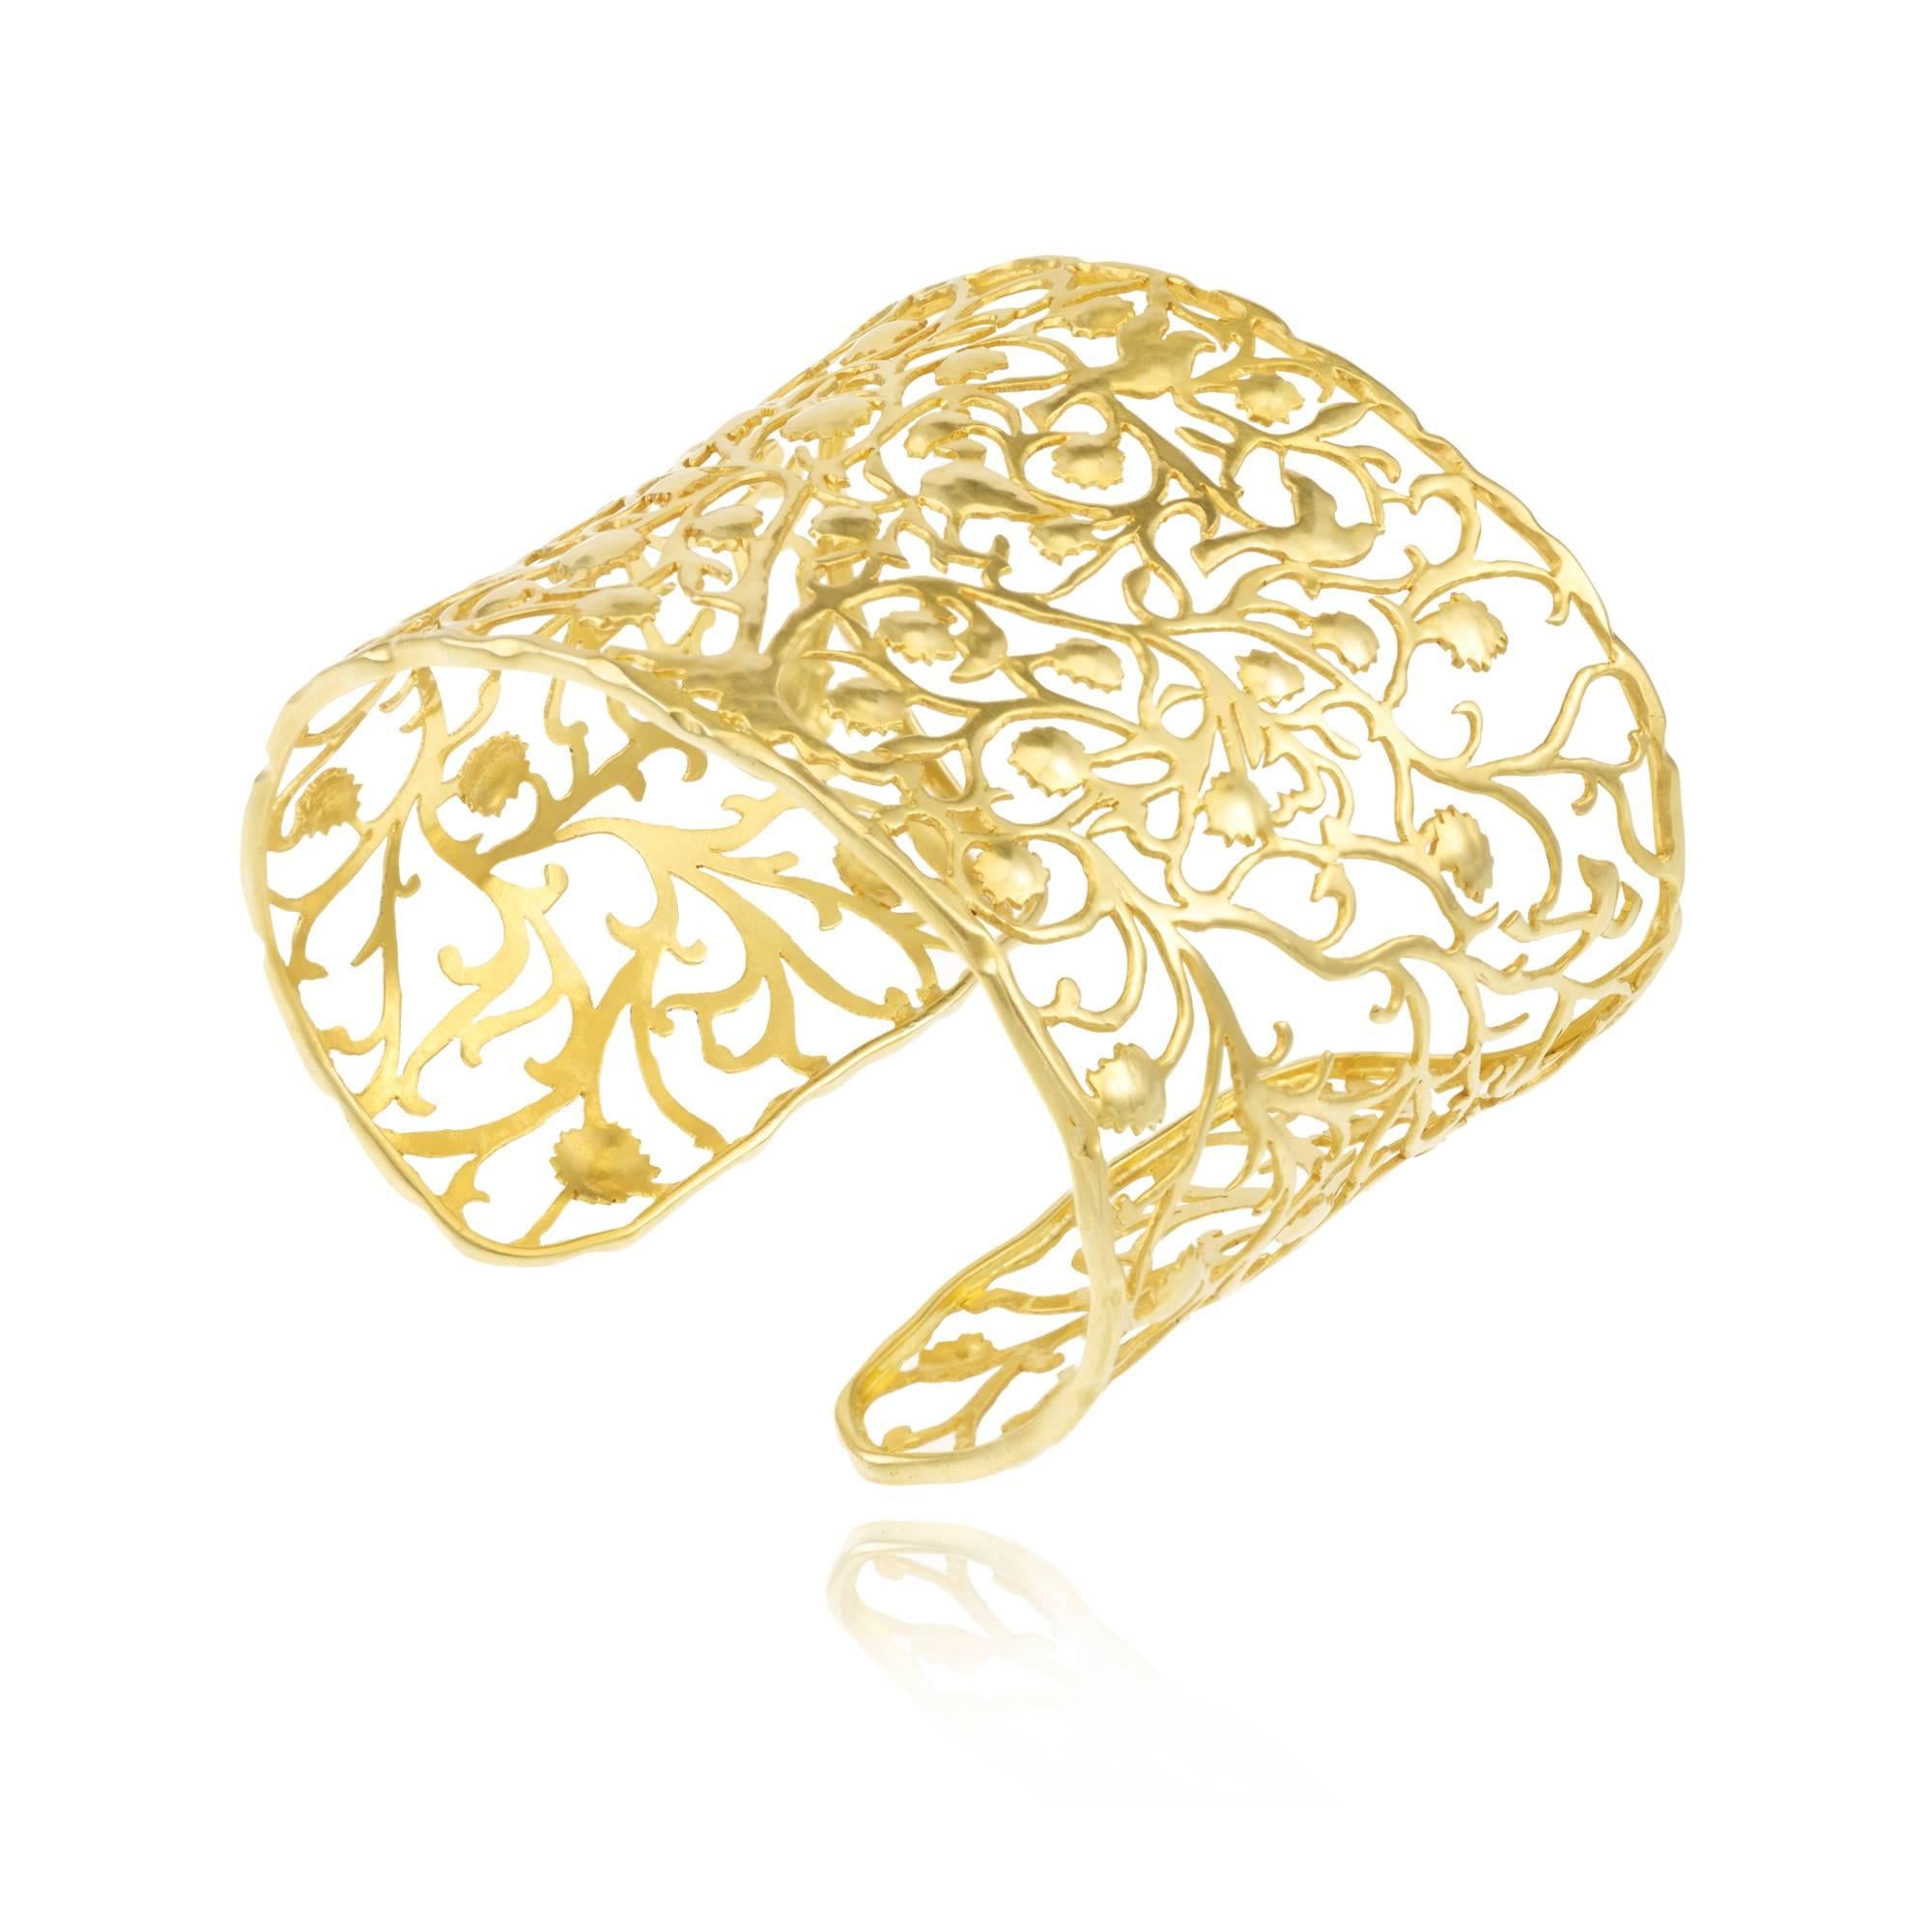 This cuff, made from gold filigree, wraps the wrist and tells a story. One which has always fascinated Pippa, that of the Tree of Life. An image found all over the World, a tale of the tree that shades and provides food for all creatures, holding